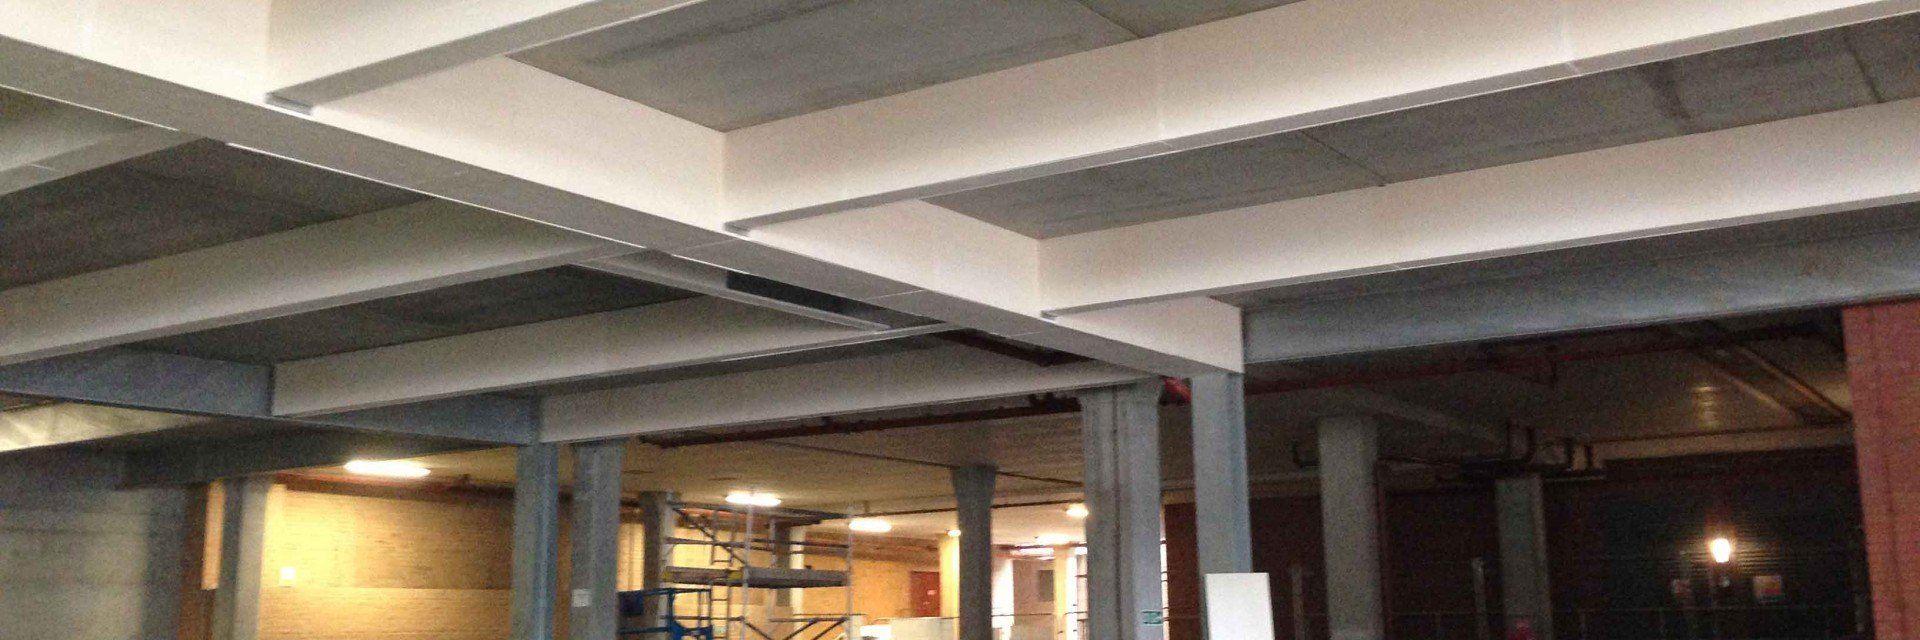 Experts in Installing Suspended Ceilings